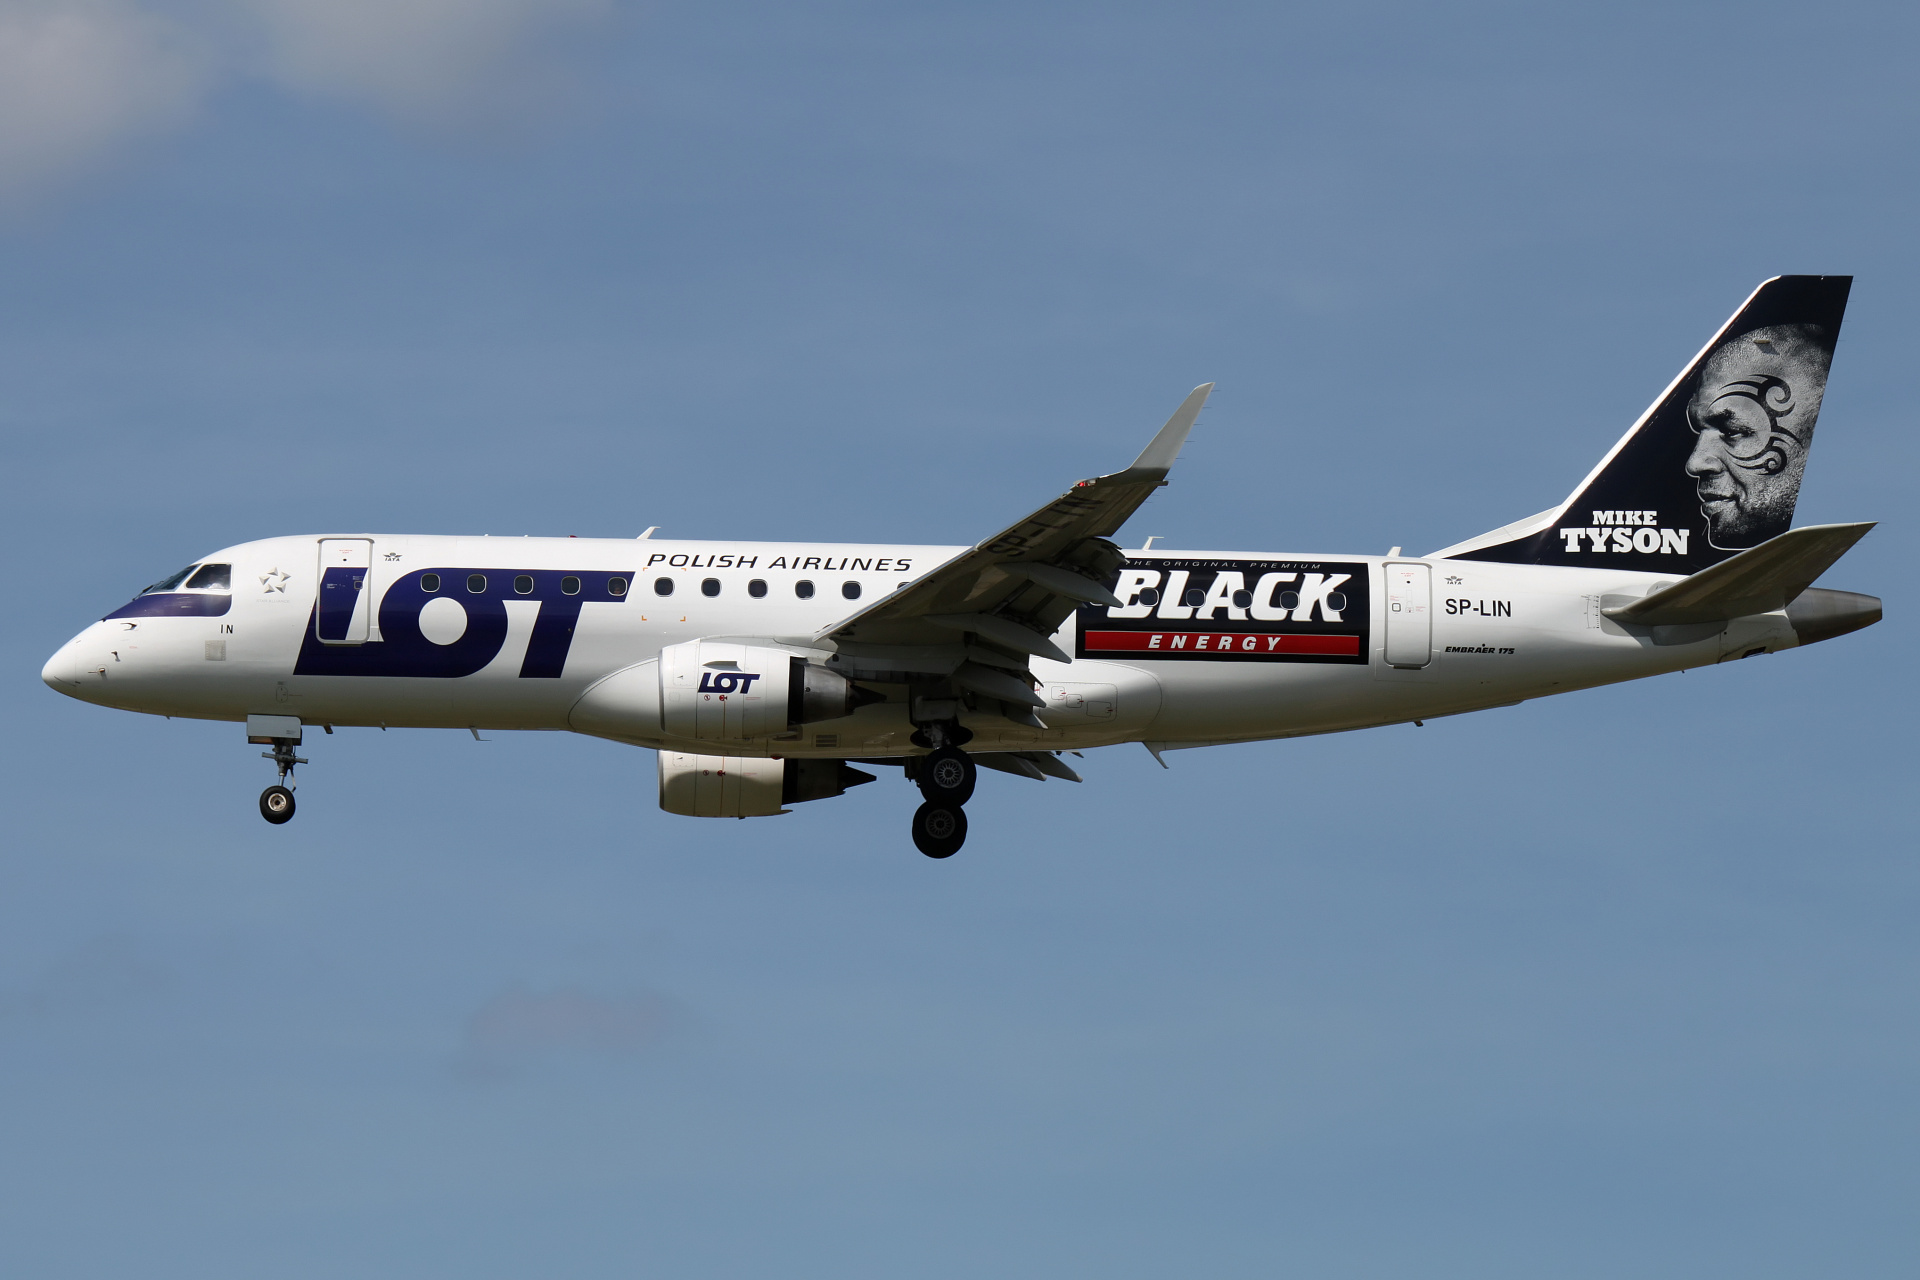 SP-LIN (Black Energy Drink livery) (Aircraft » EPWA Spotting » Embraer E175 » LOT Polish Airlines)